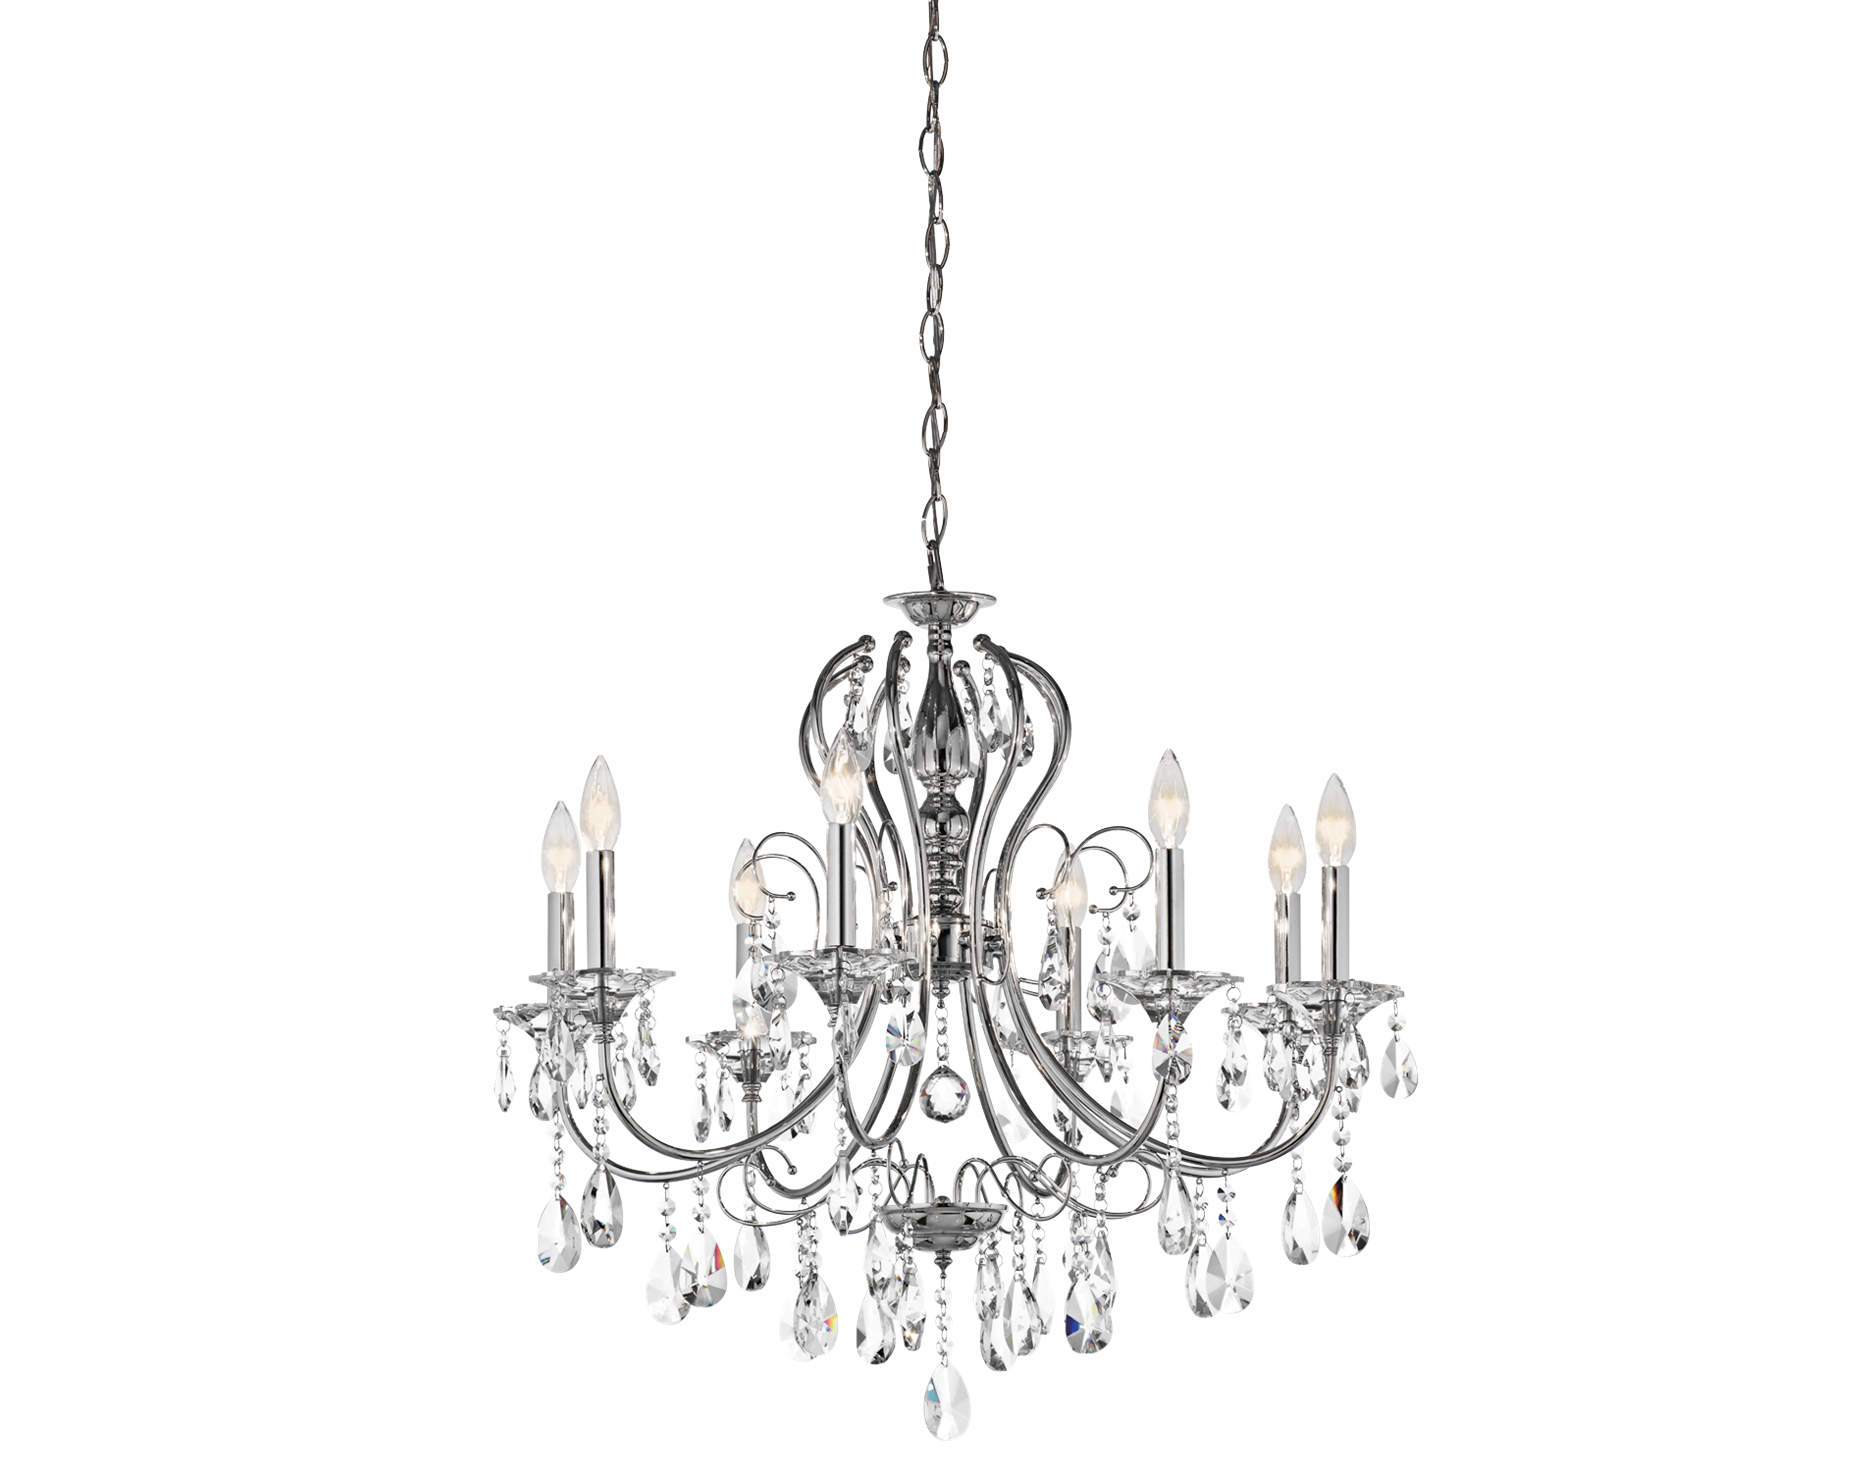 Chandeliers PNG Background Image